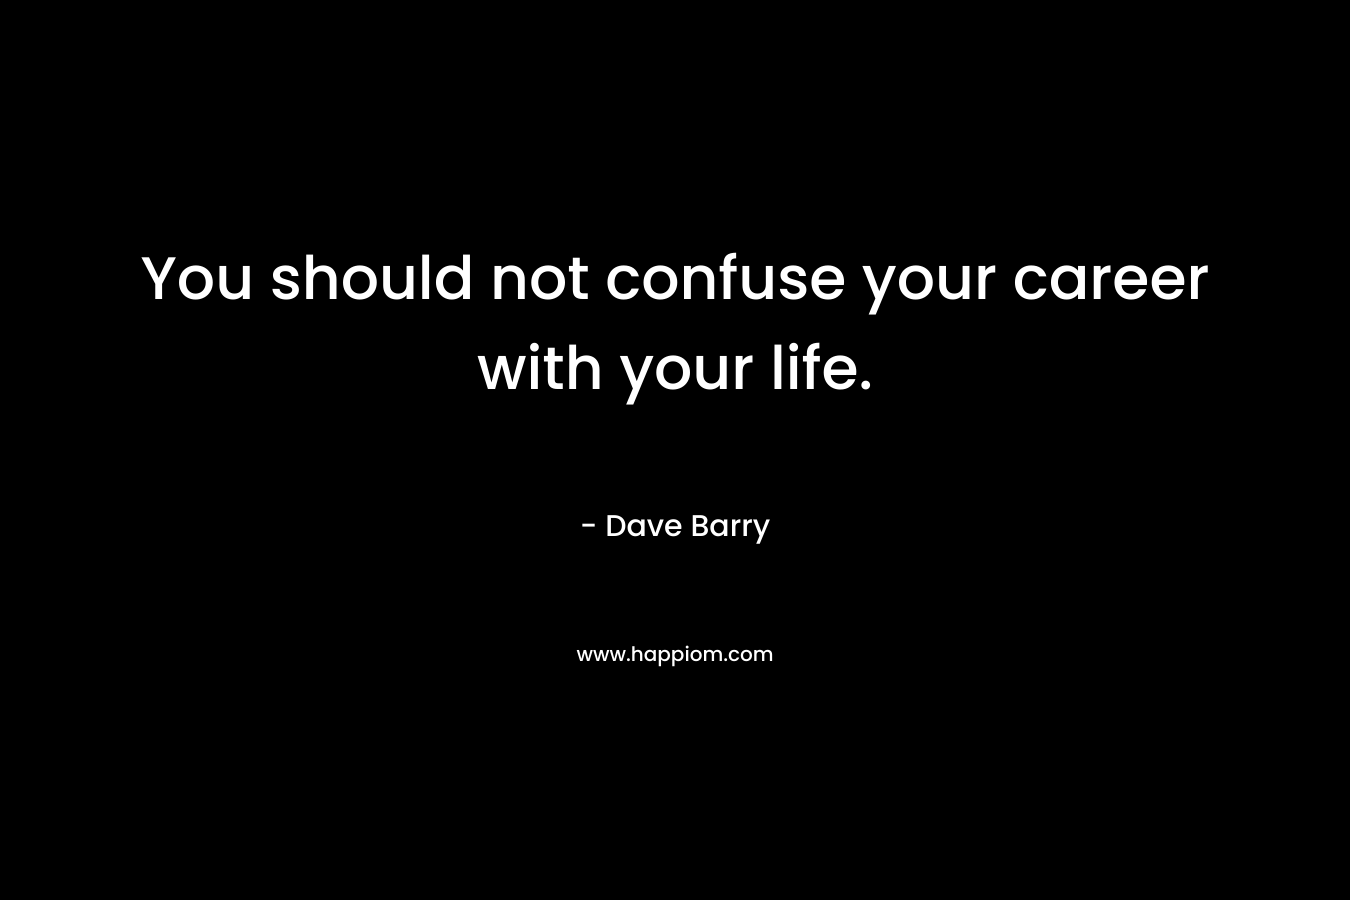 You should not confuse your career with your life. – Dave Barry